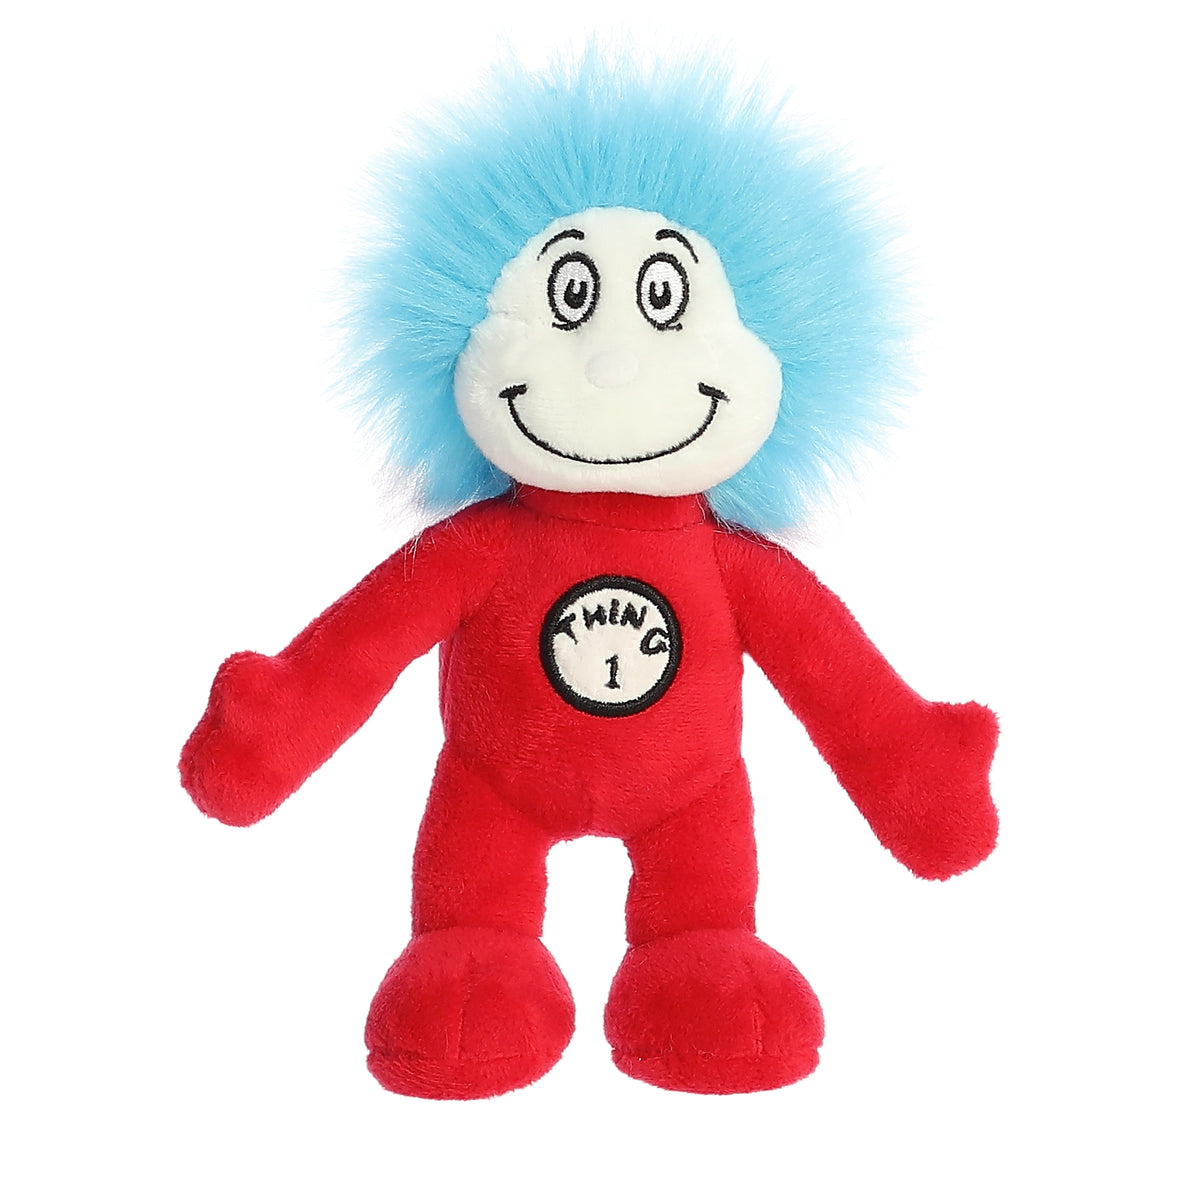 A playful Thing 1 Dr Seuss plush toy armature with the iconic red onesie, fluffy bright blue hair, and Thing 1 embroidery.